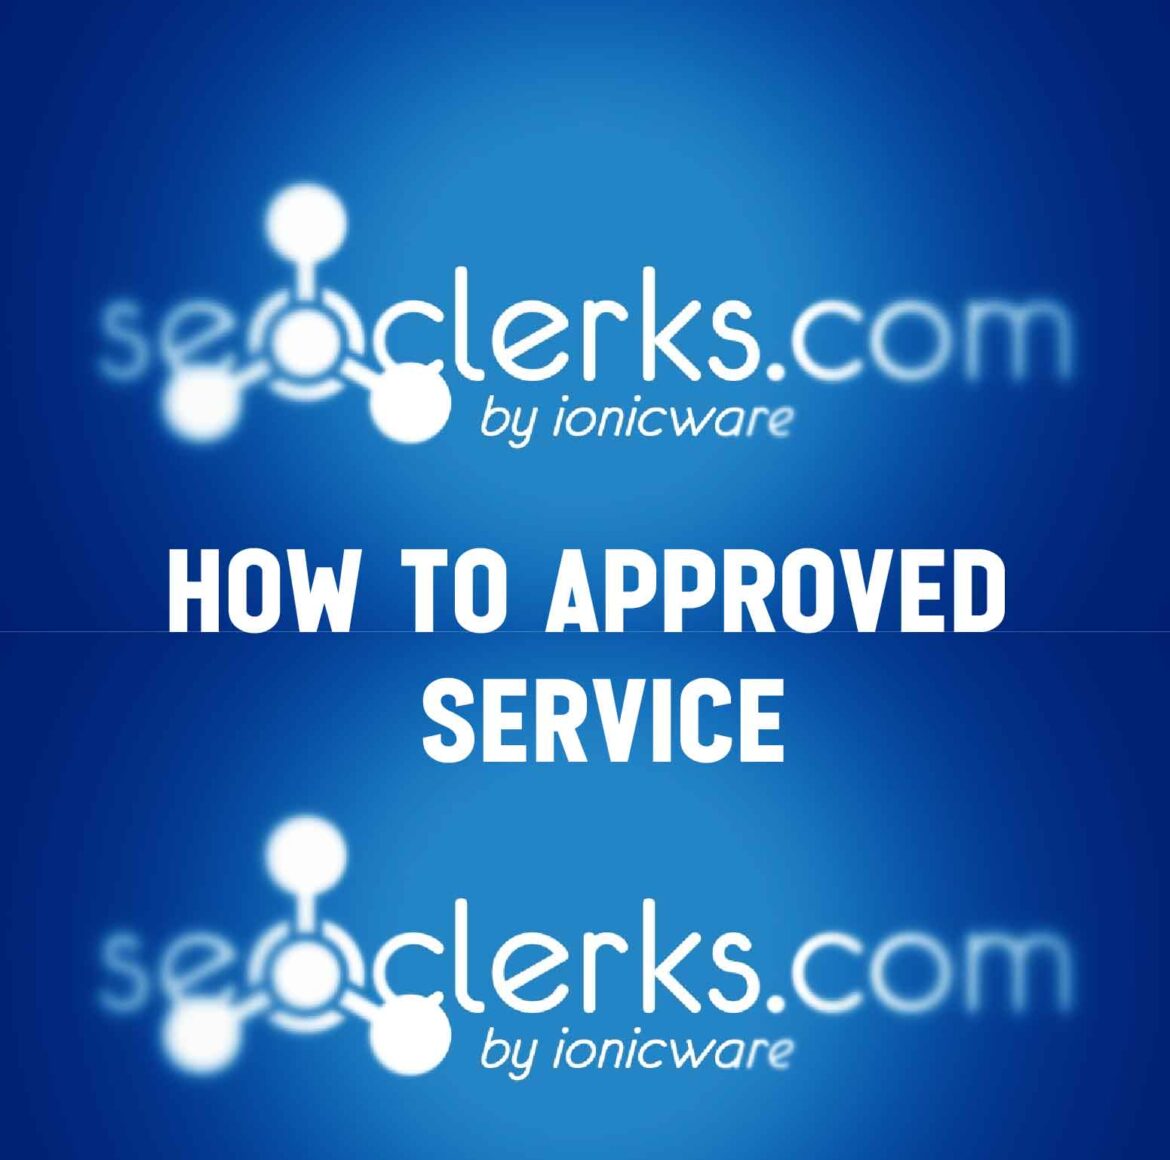 How to Get Your SEOClerk Service Approved